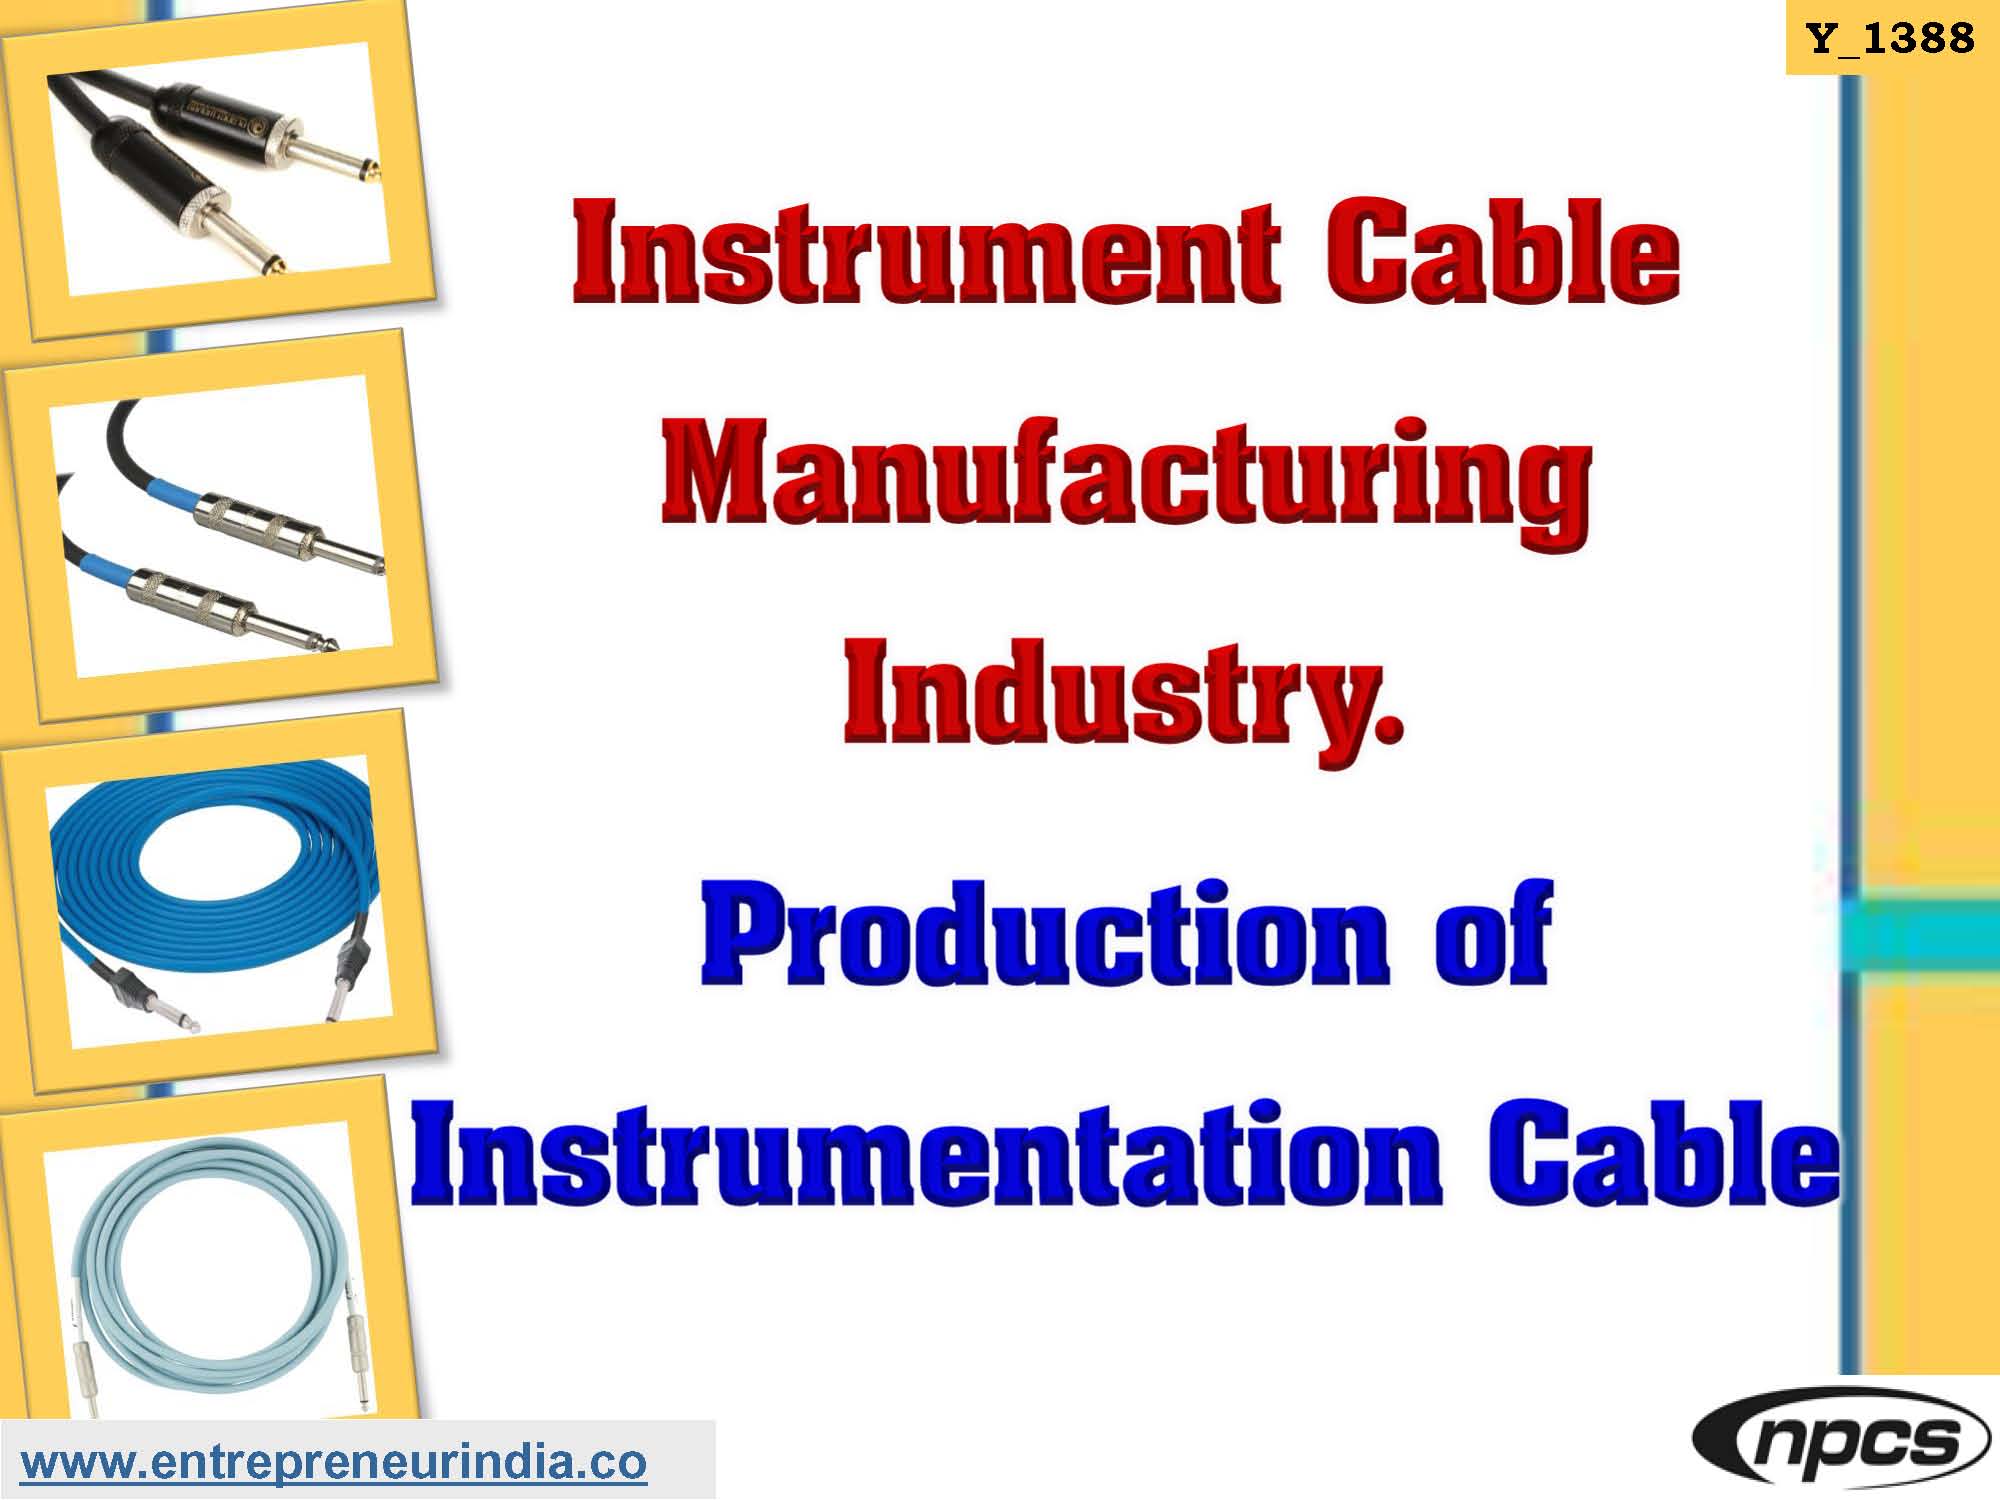 Instrument Cable Manufacturing Industry.jpg